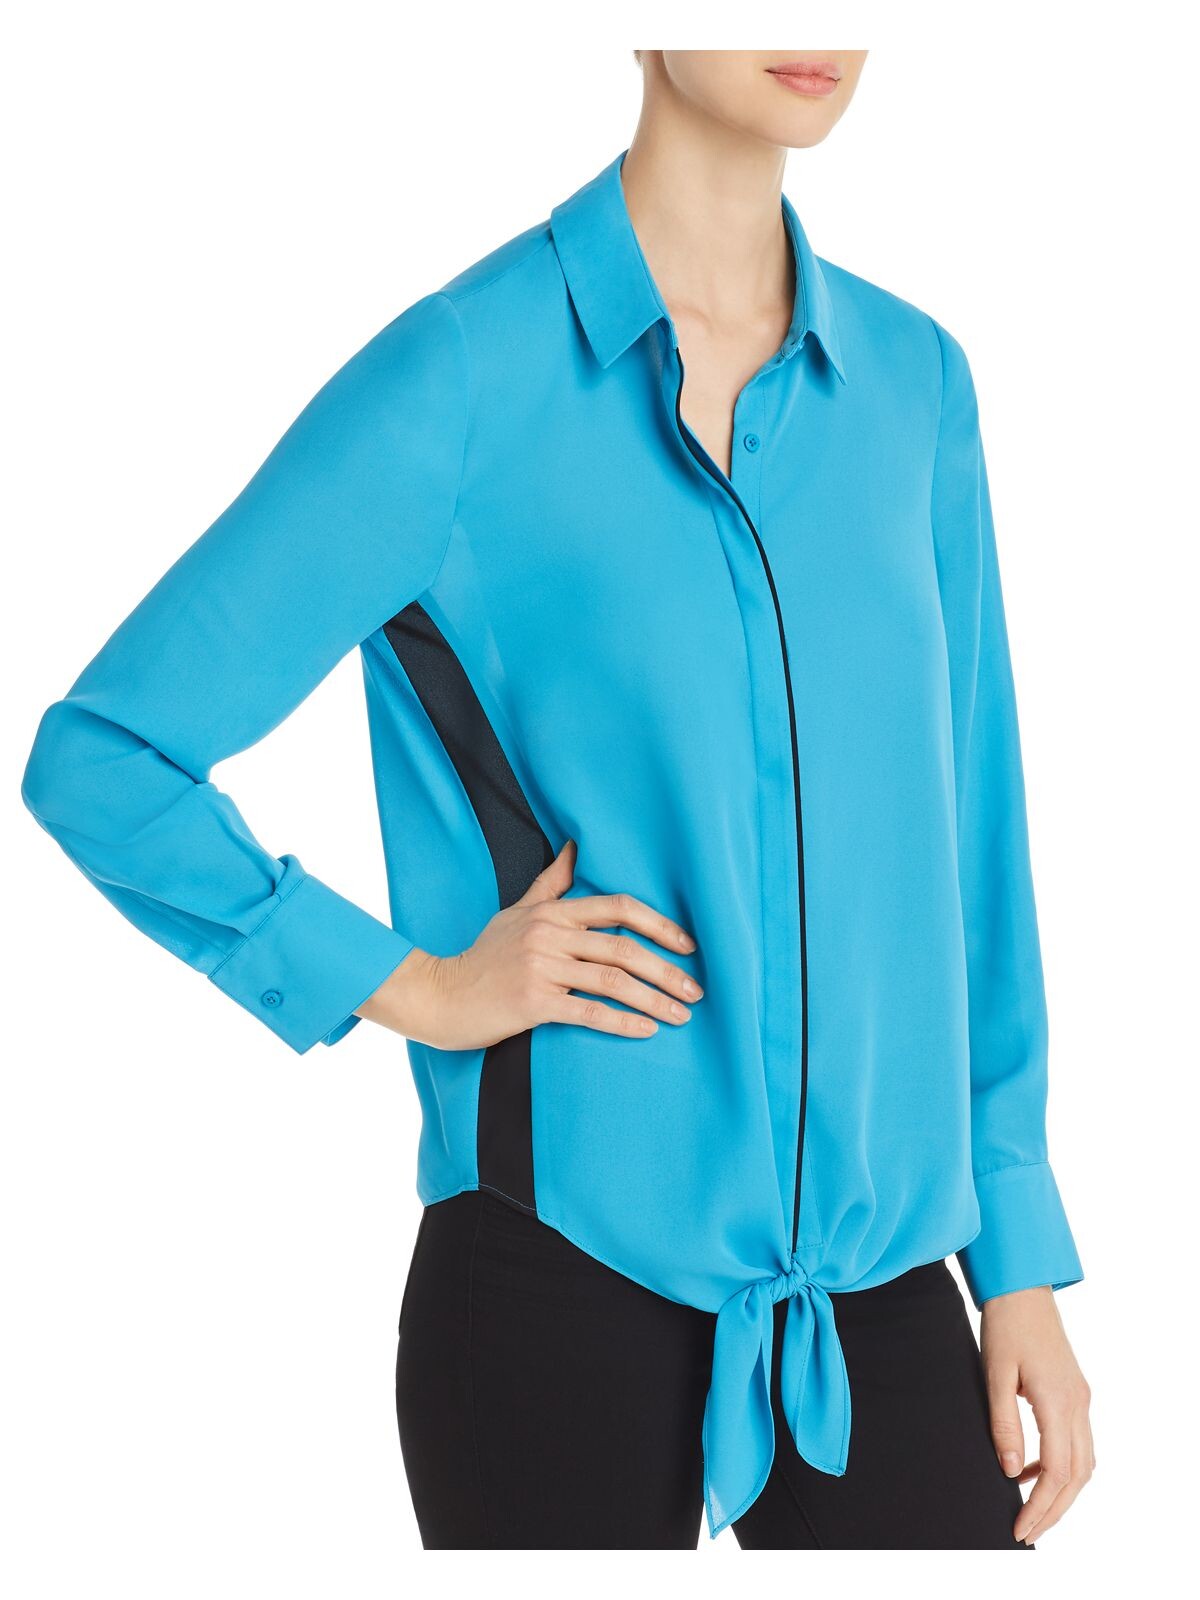 LE GALI Womens Blue Tie Front Long Sleeve Collared Blouse S